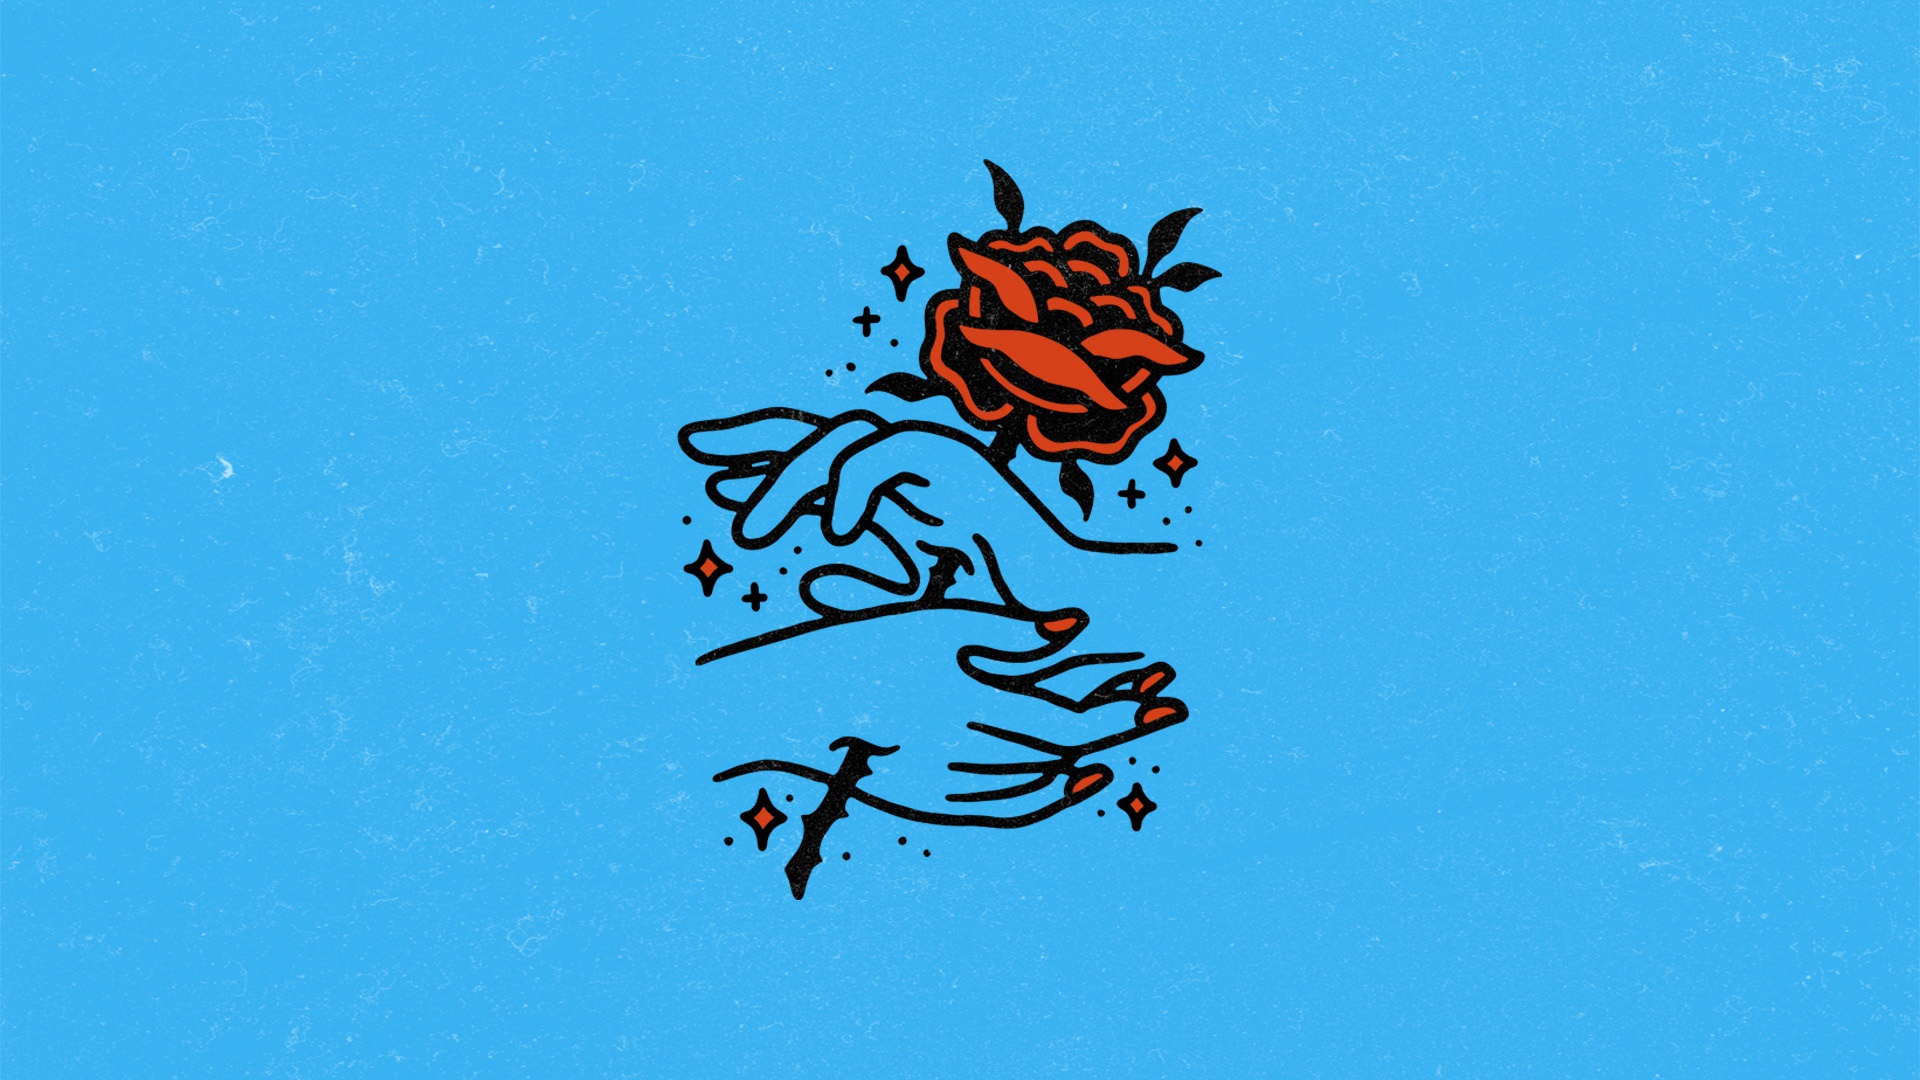 Artwork Simple Background Minimalism Blue Background Hands Rose Flowers Red Flowers Plants 1920x1080